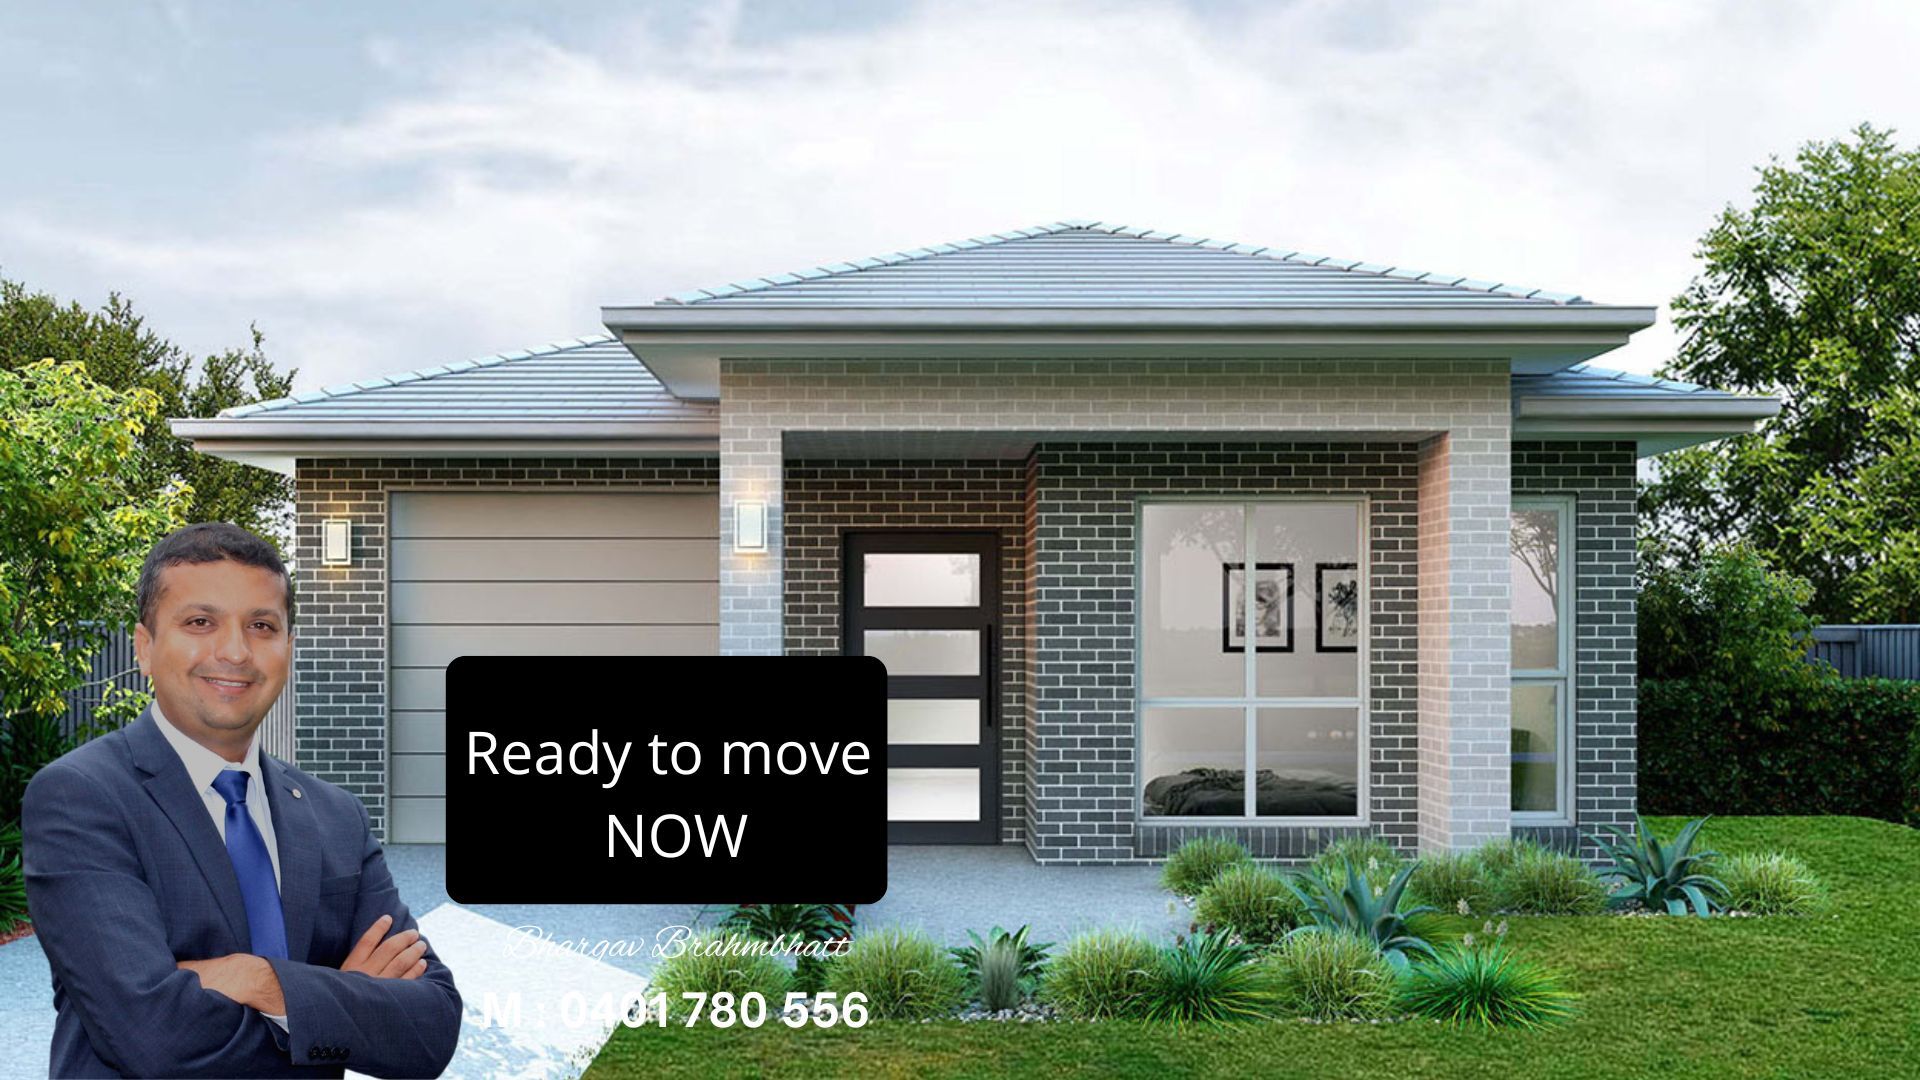 4 bedrooms New House & Land in READY HOMES 148 MEGALONG STREET THE PONDS NSW, 2769